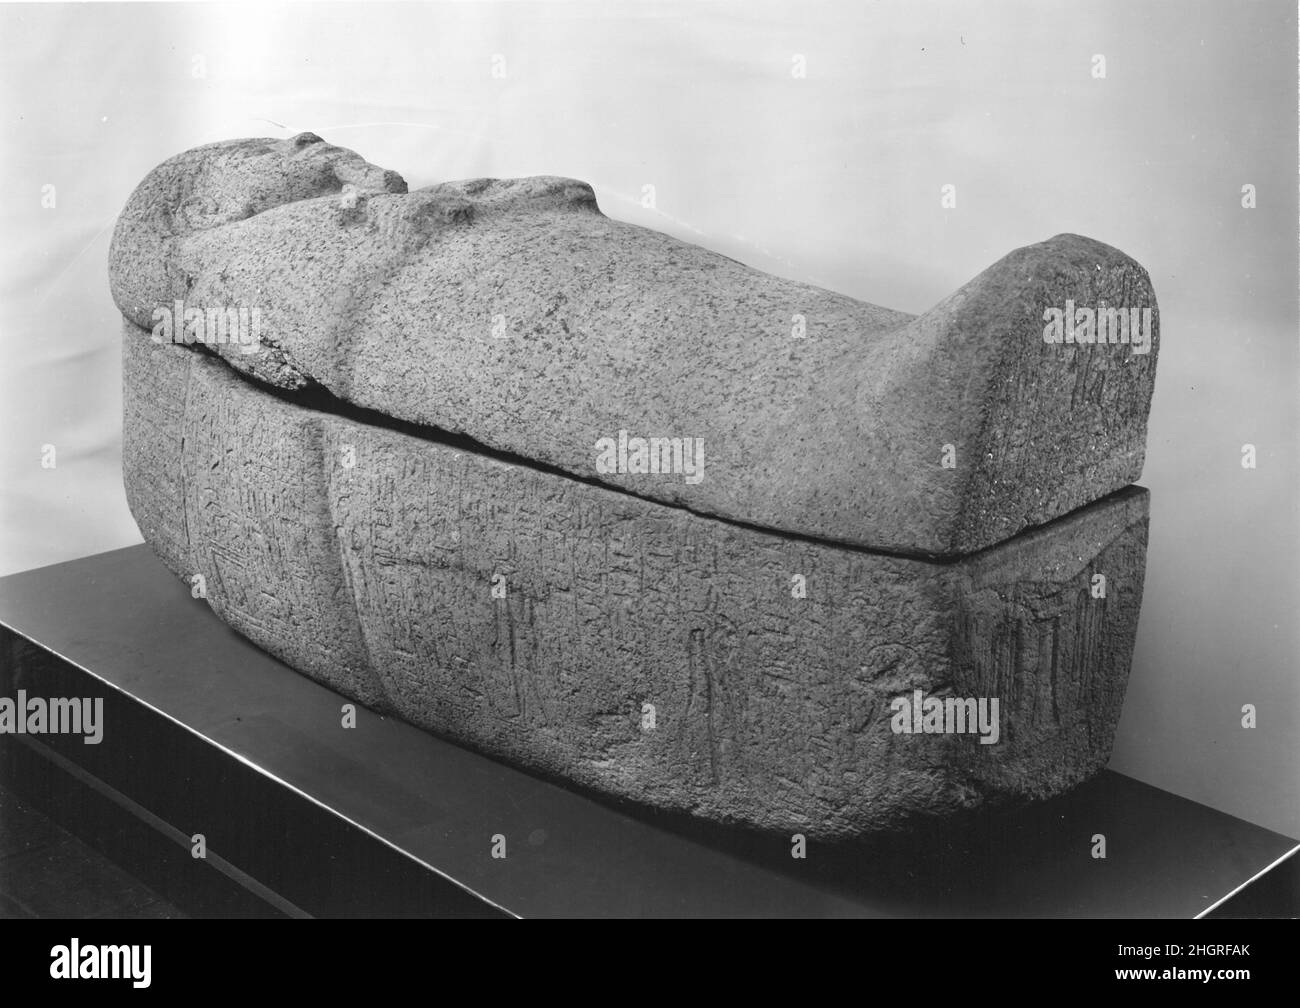 Sarcophagus of Usermontu ca. 1279–1213 B.C. New Kingdom, Ramesside This anthropoid sarcophagus belonged to Usermontu, High Priest of Montu and Priest of Amun during the latter part of the reign of Ramesses II. A large sarcophagus of black granite was found inside his tomb in the Theban necropolis; presumably, this pink granite sarcophagus lay inside the larger one. This is an unusual object, as it was rare for private individuals in the New Kingdom to have stone sarcophagi. Here Usermontu wears a long striated wig bound with a floral fillet and the long curved beard of divinity. His crossed ha Stock Photo